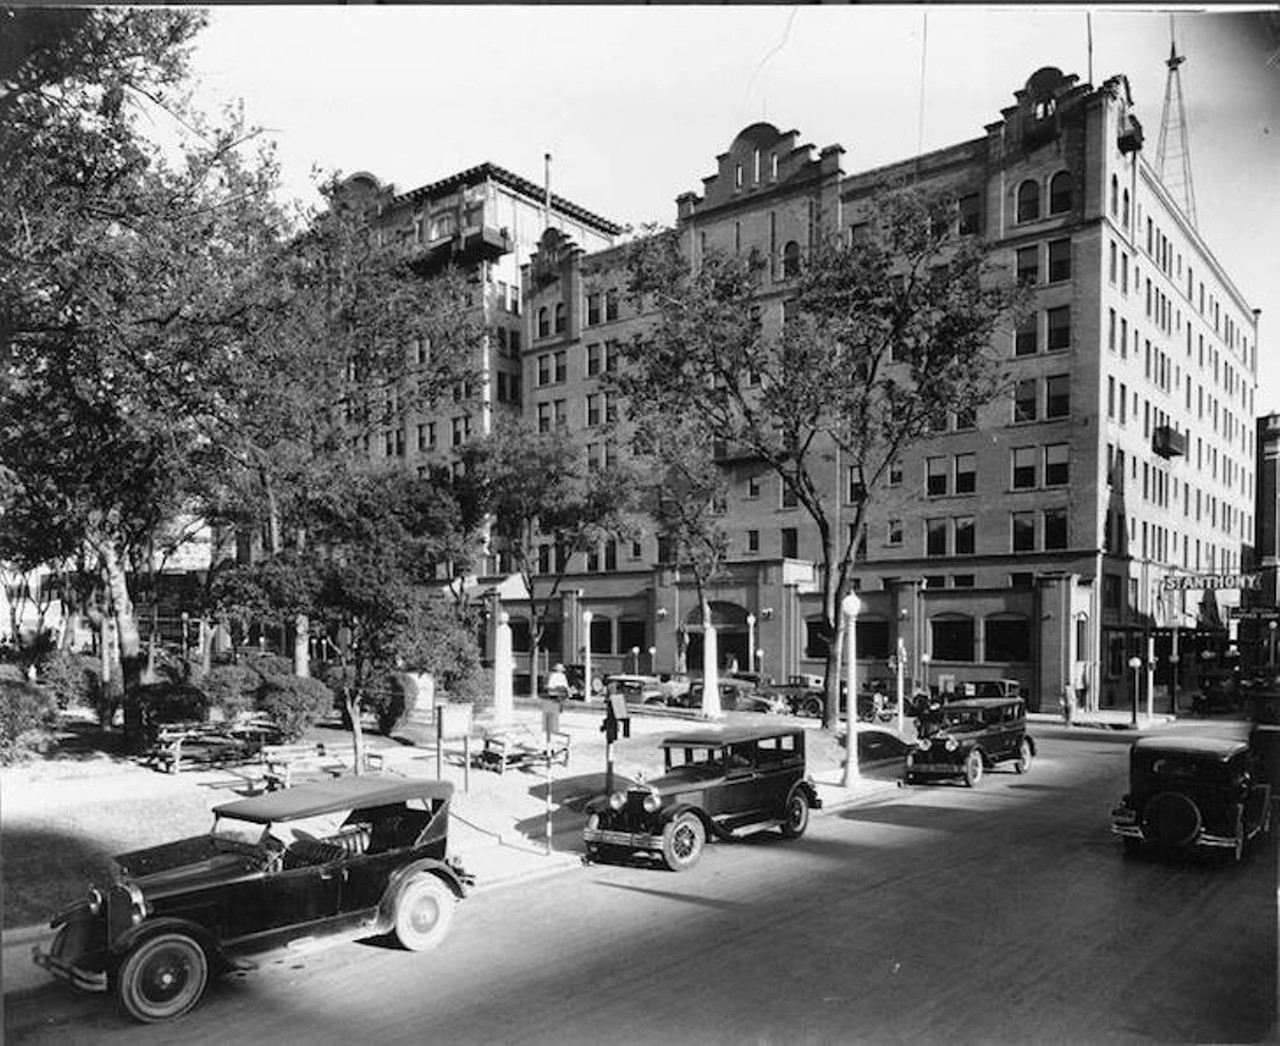 1920-29, St. Anthony Hotel and Travis Park on Navarro Street.
UTSA Special Collections